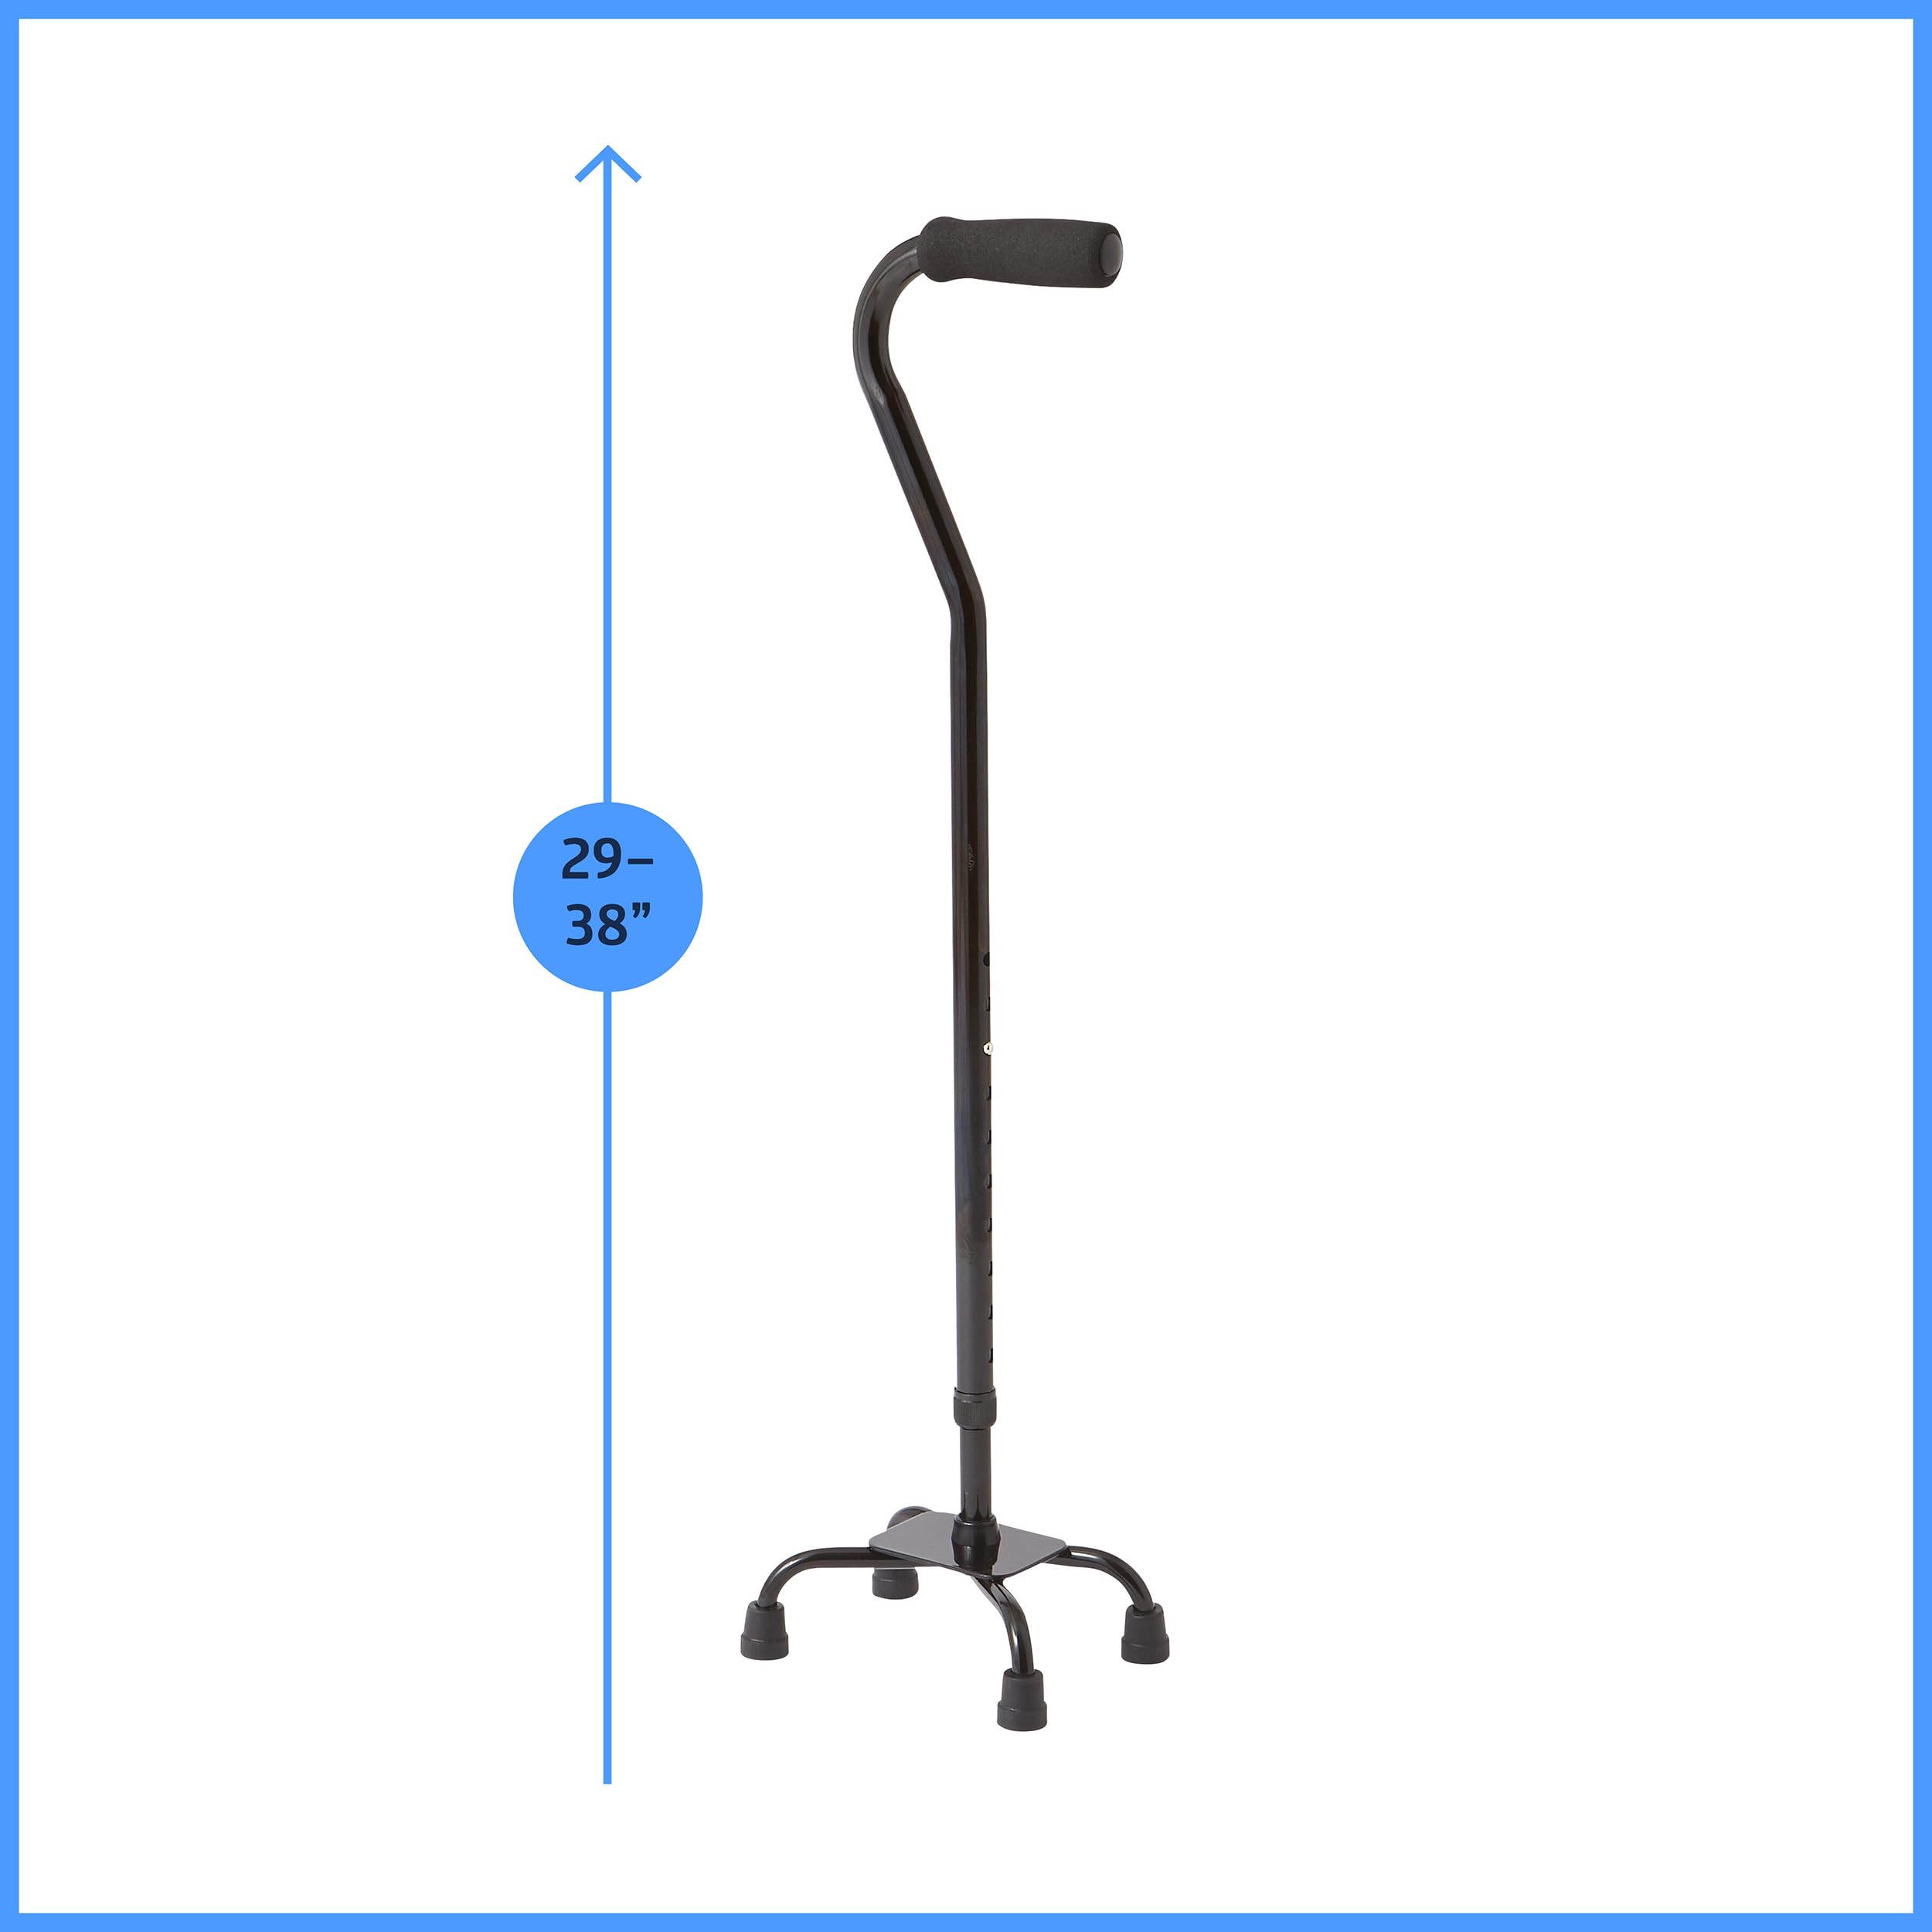 Medline Aluminum Quad Cane with Small Base for Balance, Knee Injuries, Leg Surgery Recovery & Mobility, Portable, Lightweight Walking Aid for Seniors & Adults 